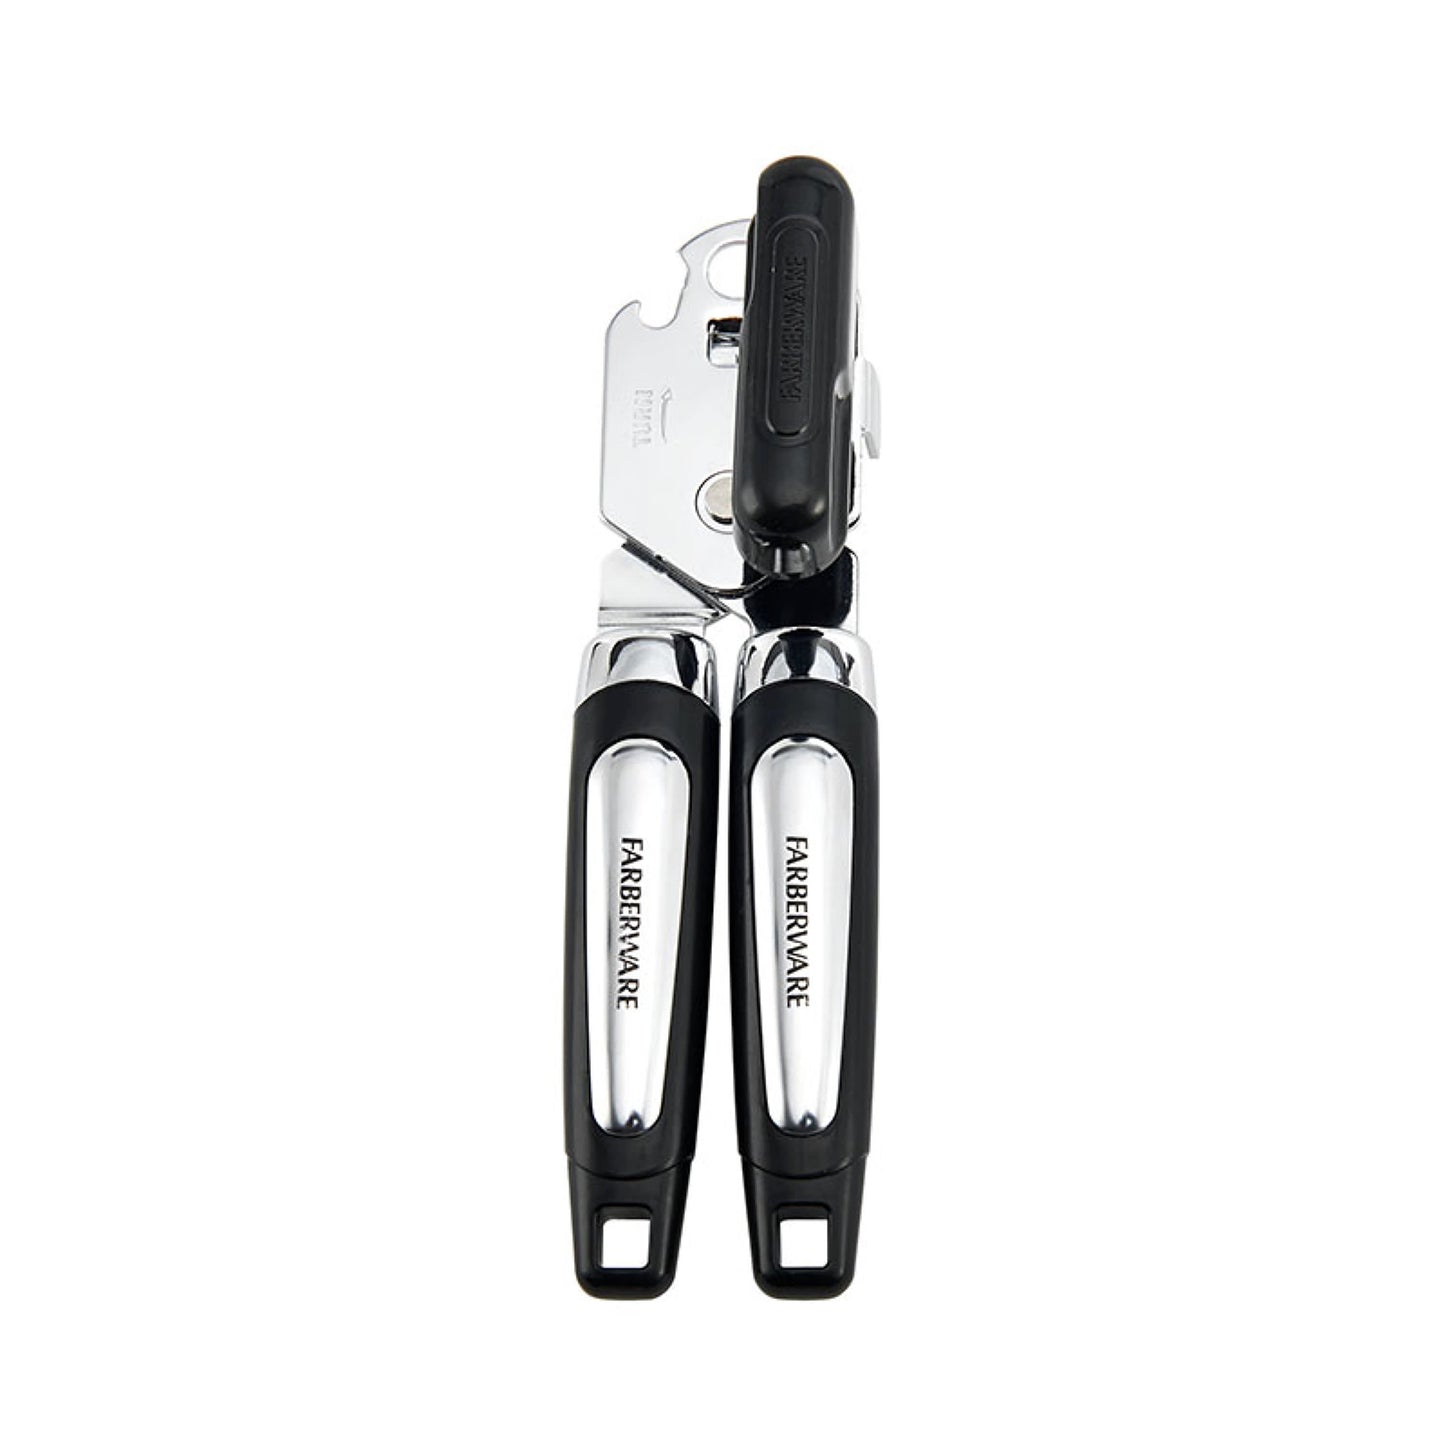 Farberware Professional Can Opener with Built in Bottle Opener in Black